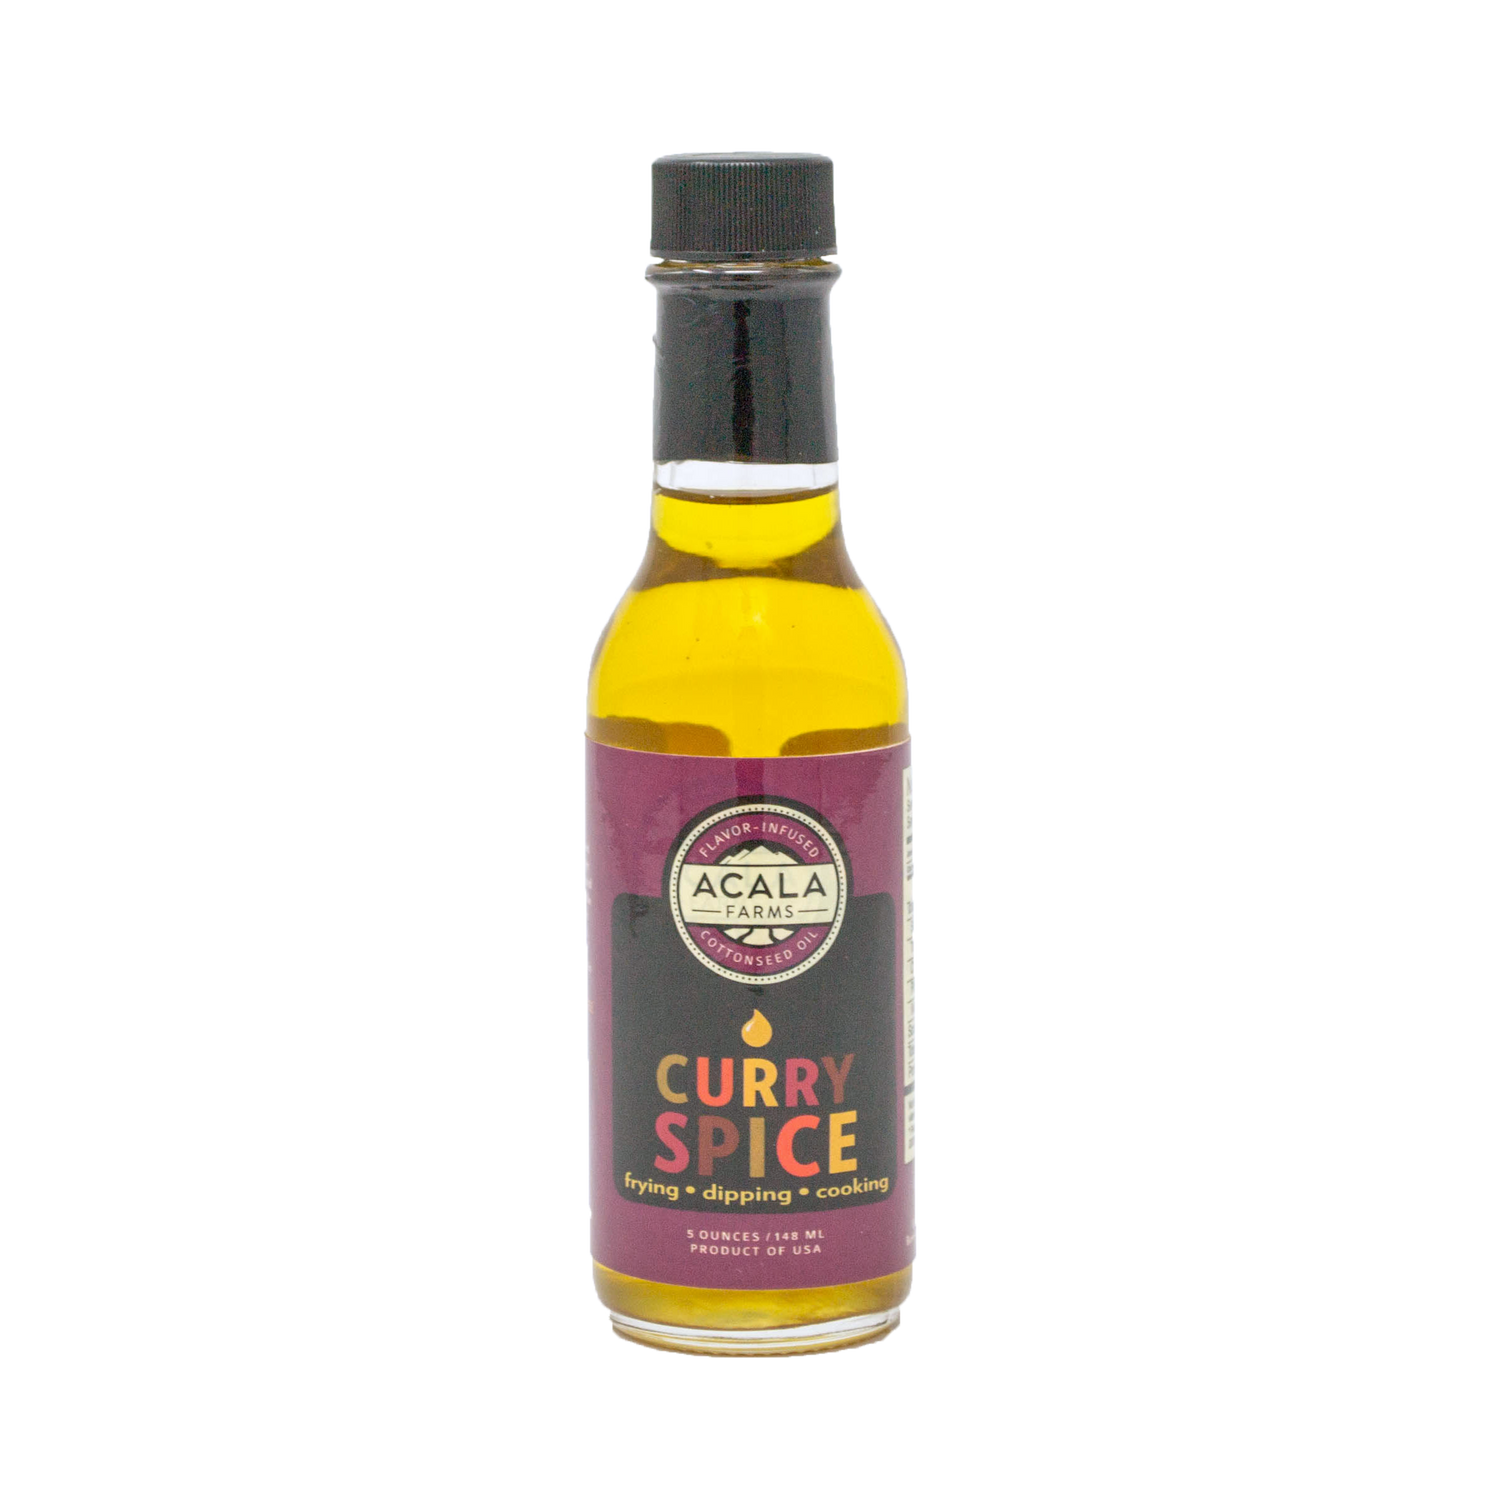 Curry Spice Acala Farms cooking oil